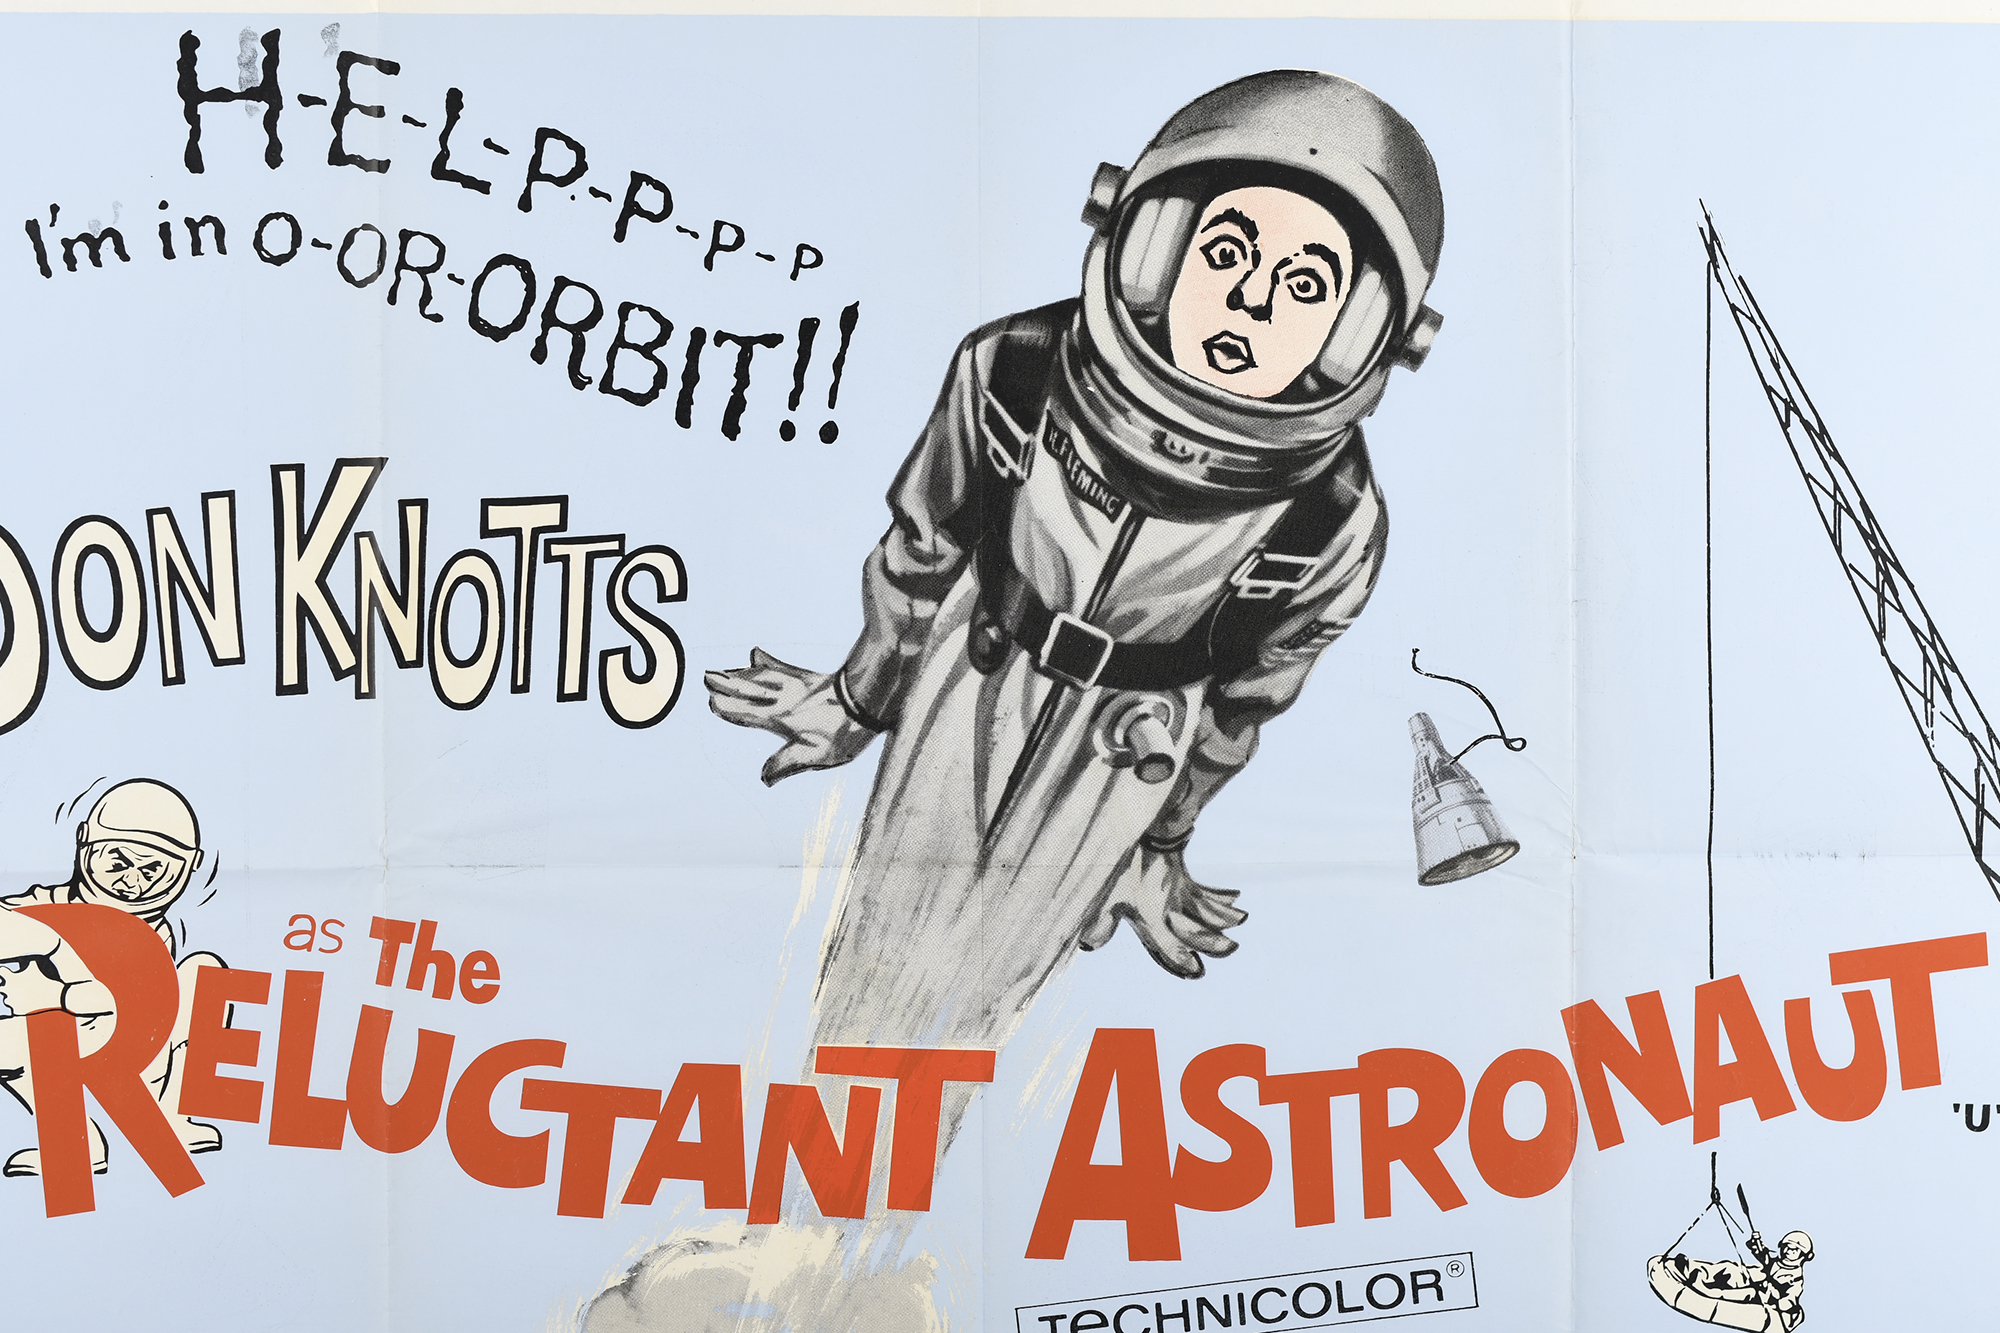 Original "The Reluctant Astronaut" Film Poster - Image 2 of 6